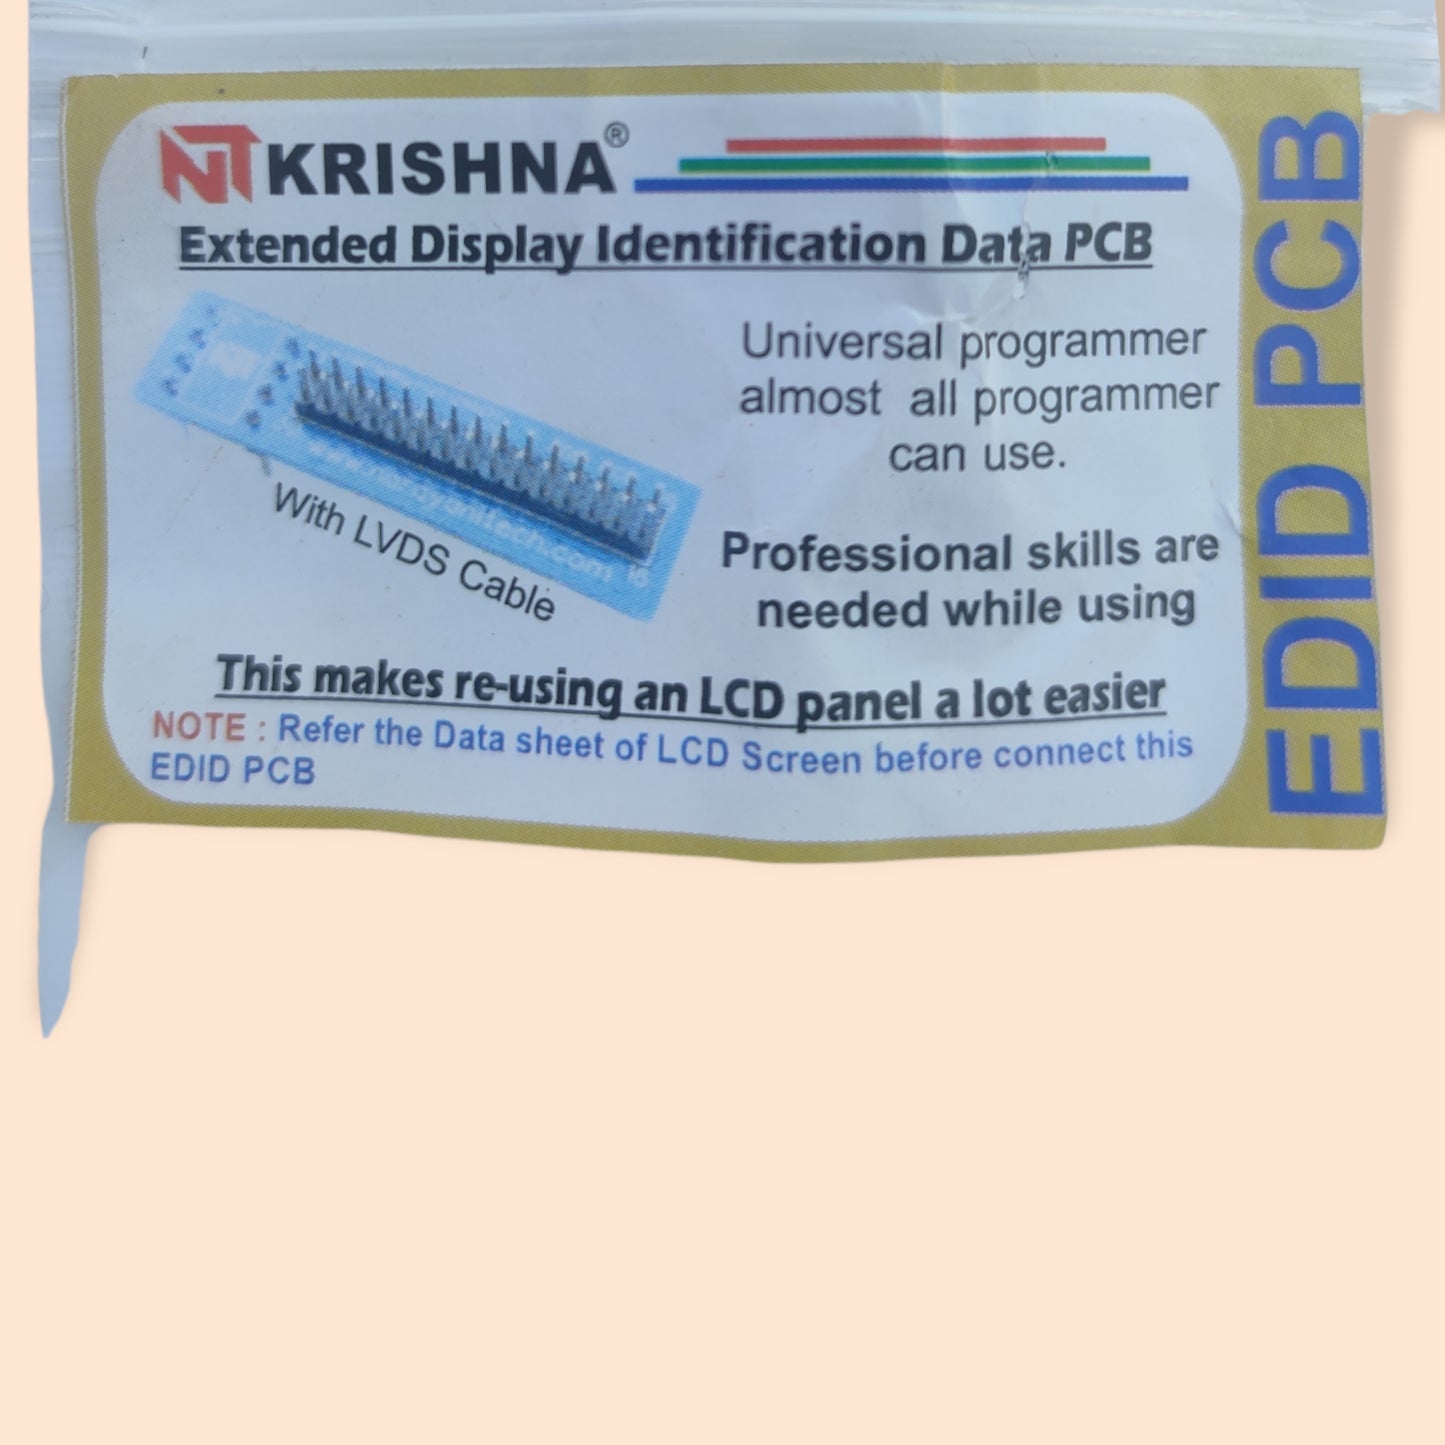 Extended display identification Data EDID PCB with LVDS Cable - Faritha